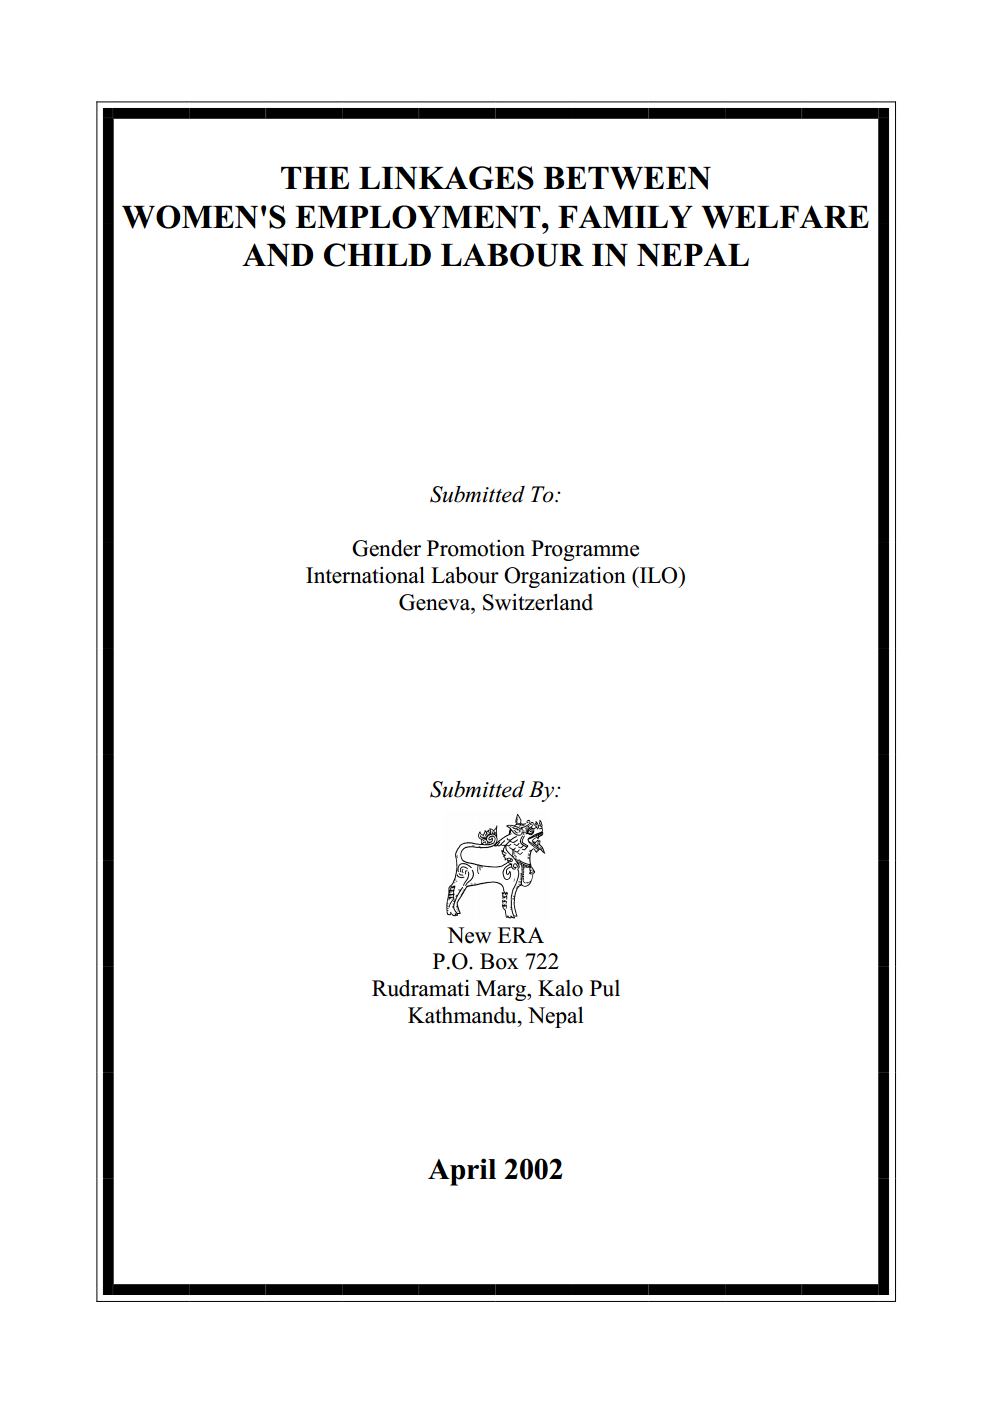 The Linkage between Women’s Employment, Family Welfare and Child Labour in Nepal